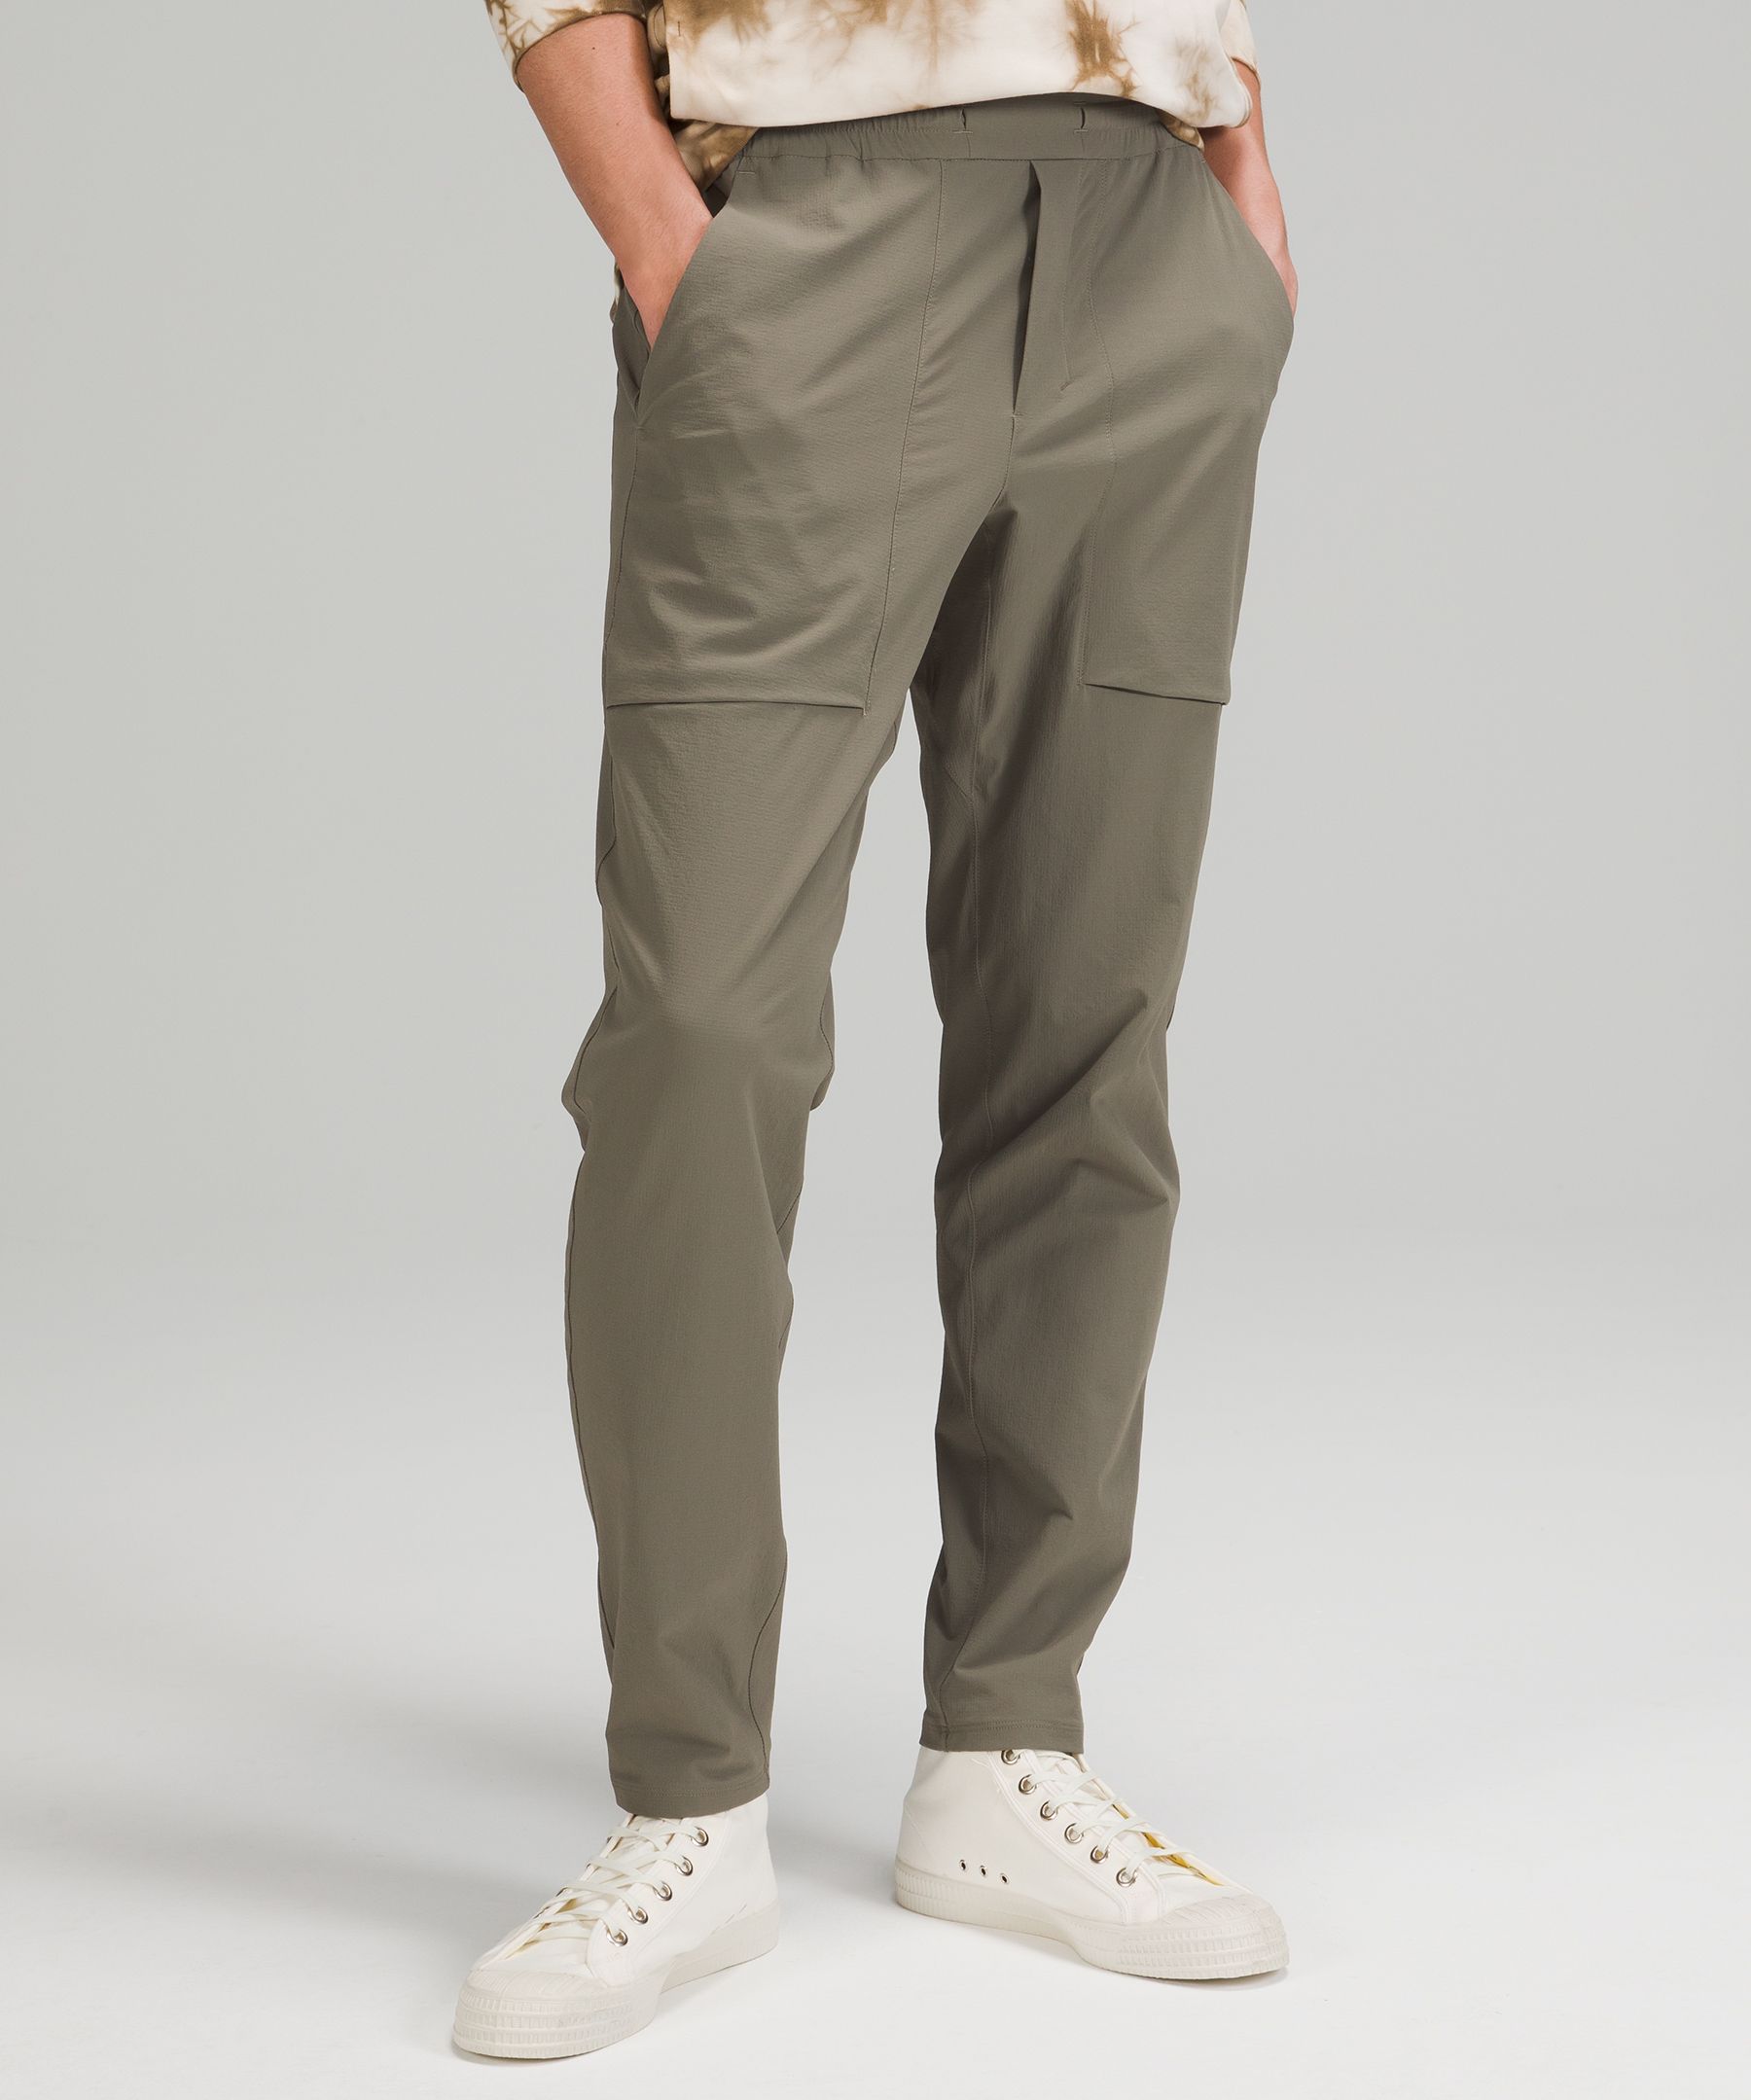 Lululemon Bowline Pant 30 Stretch Ripstop *online Only - Brown